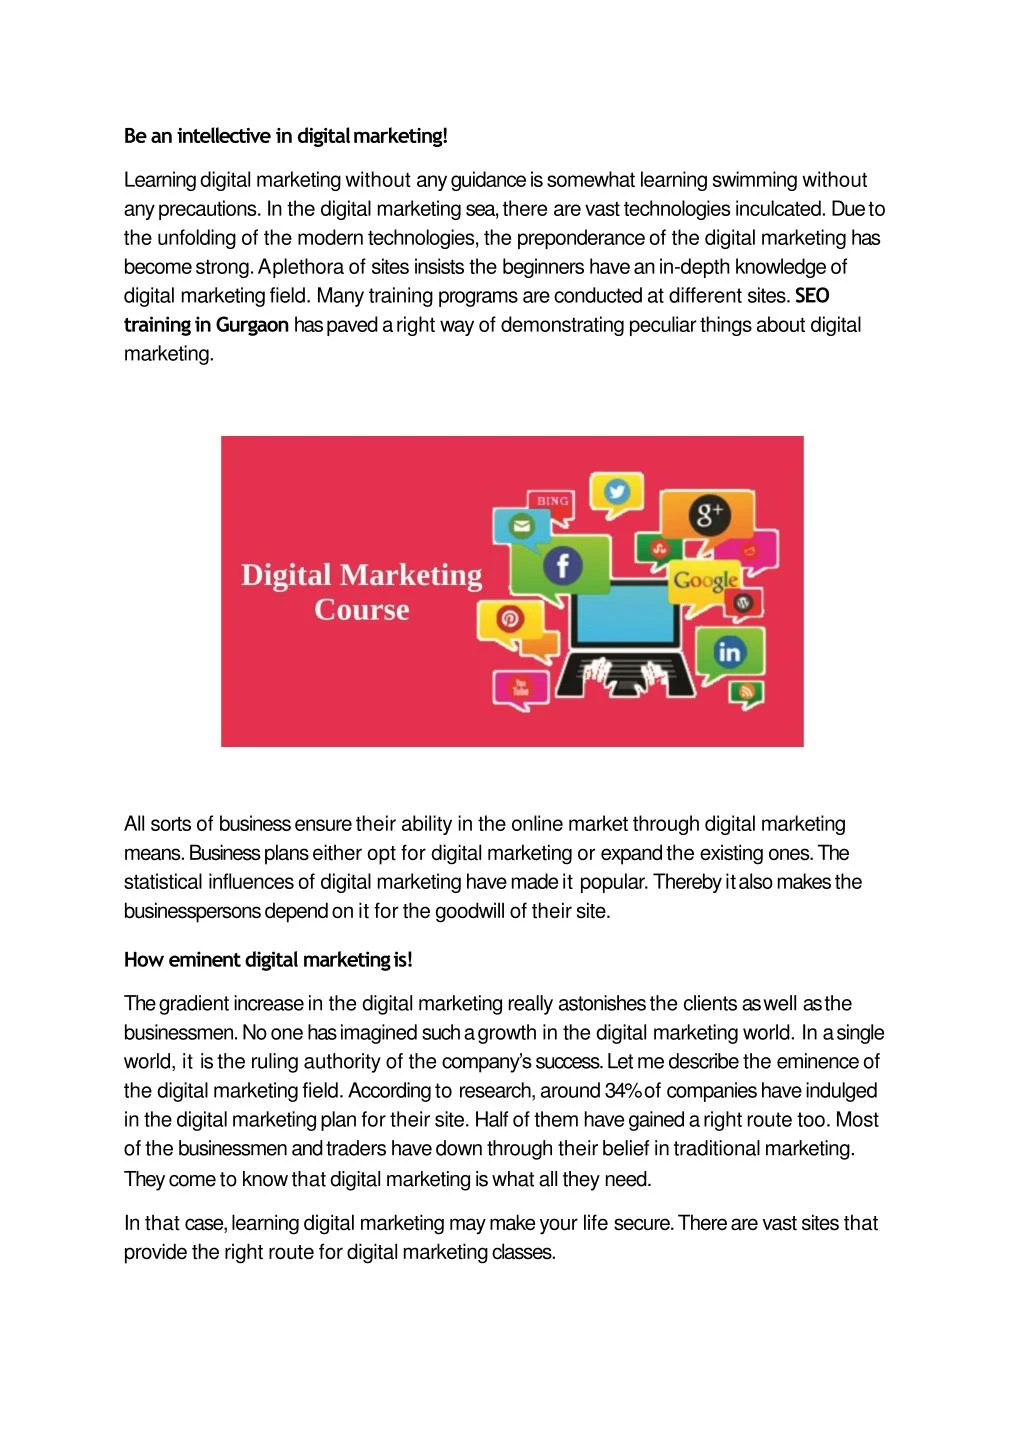 be an intellective in digital marketing learning